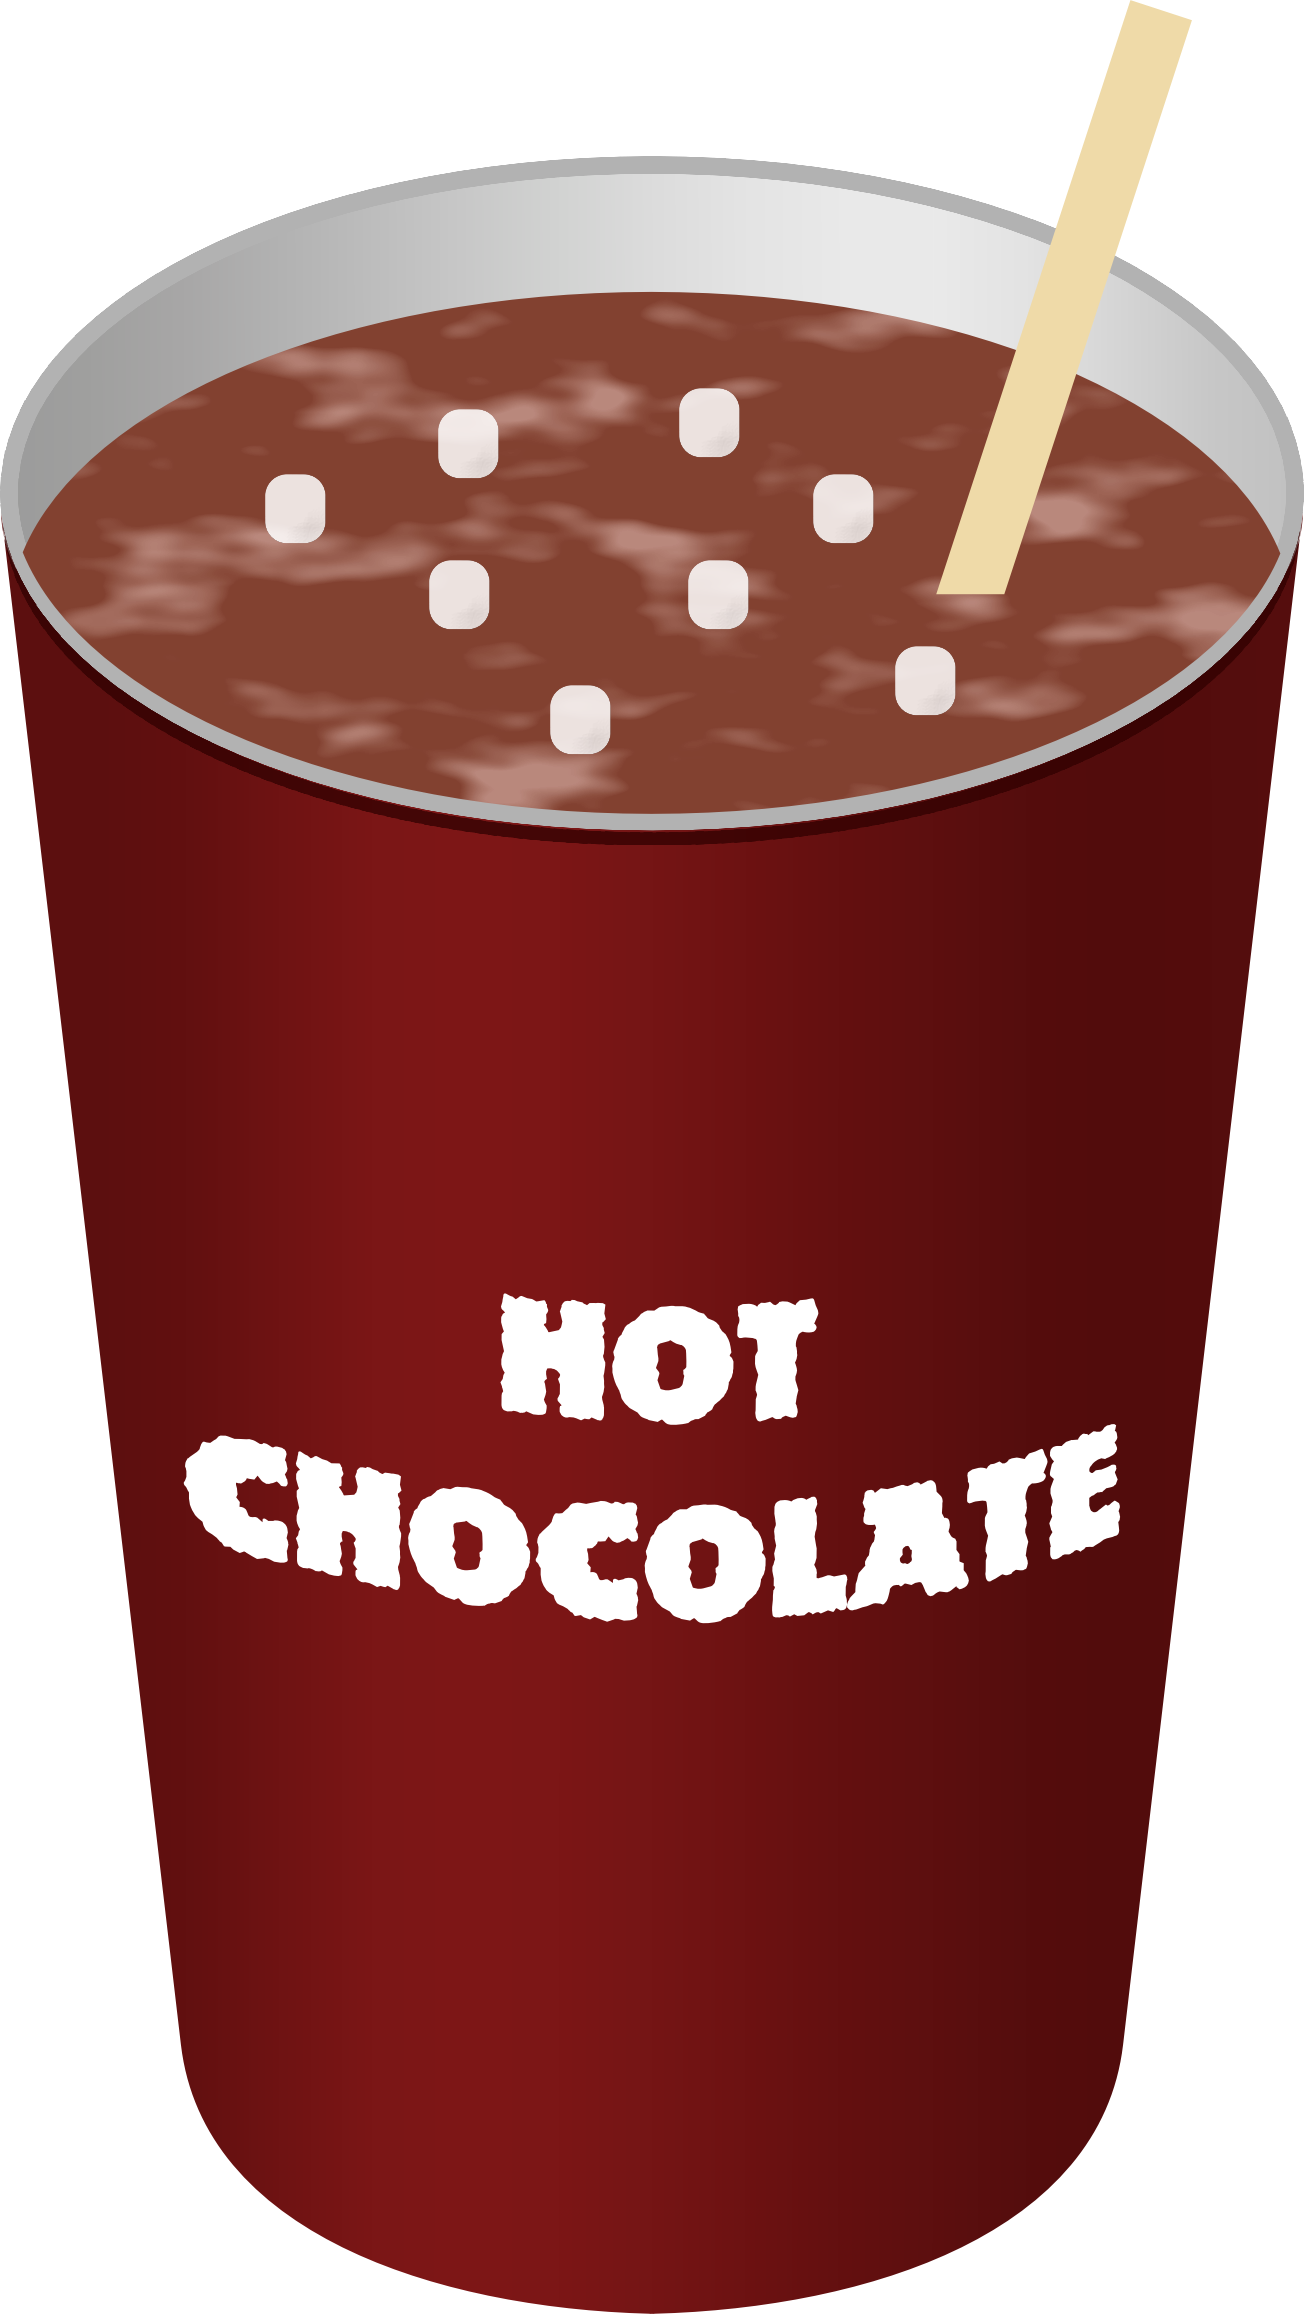 cup of hot chocolate clipart - photo #24